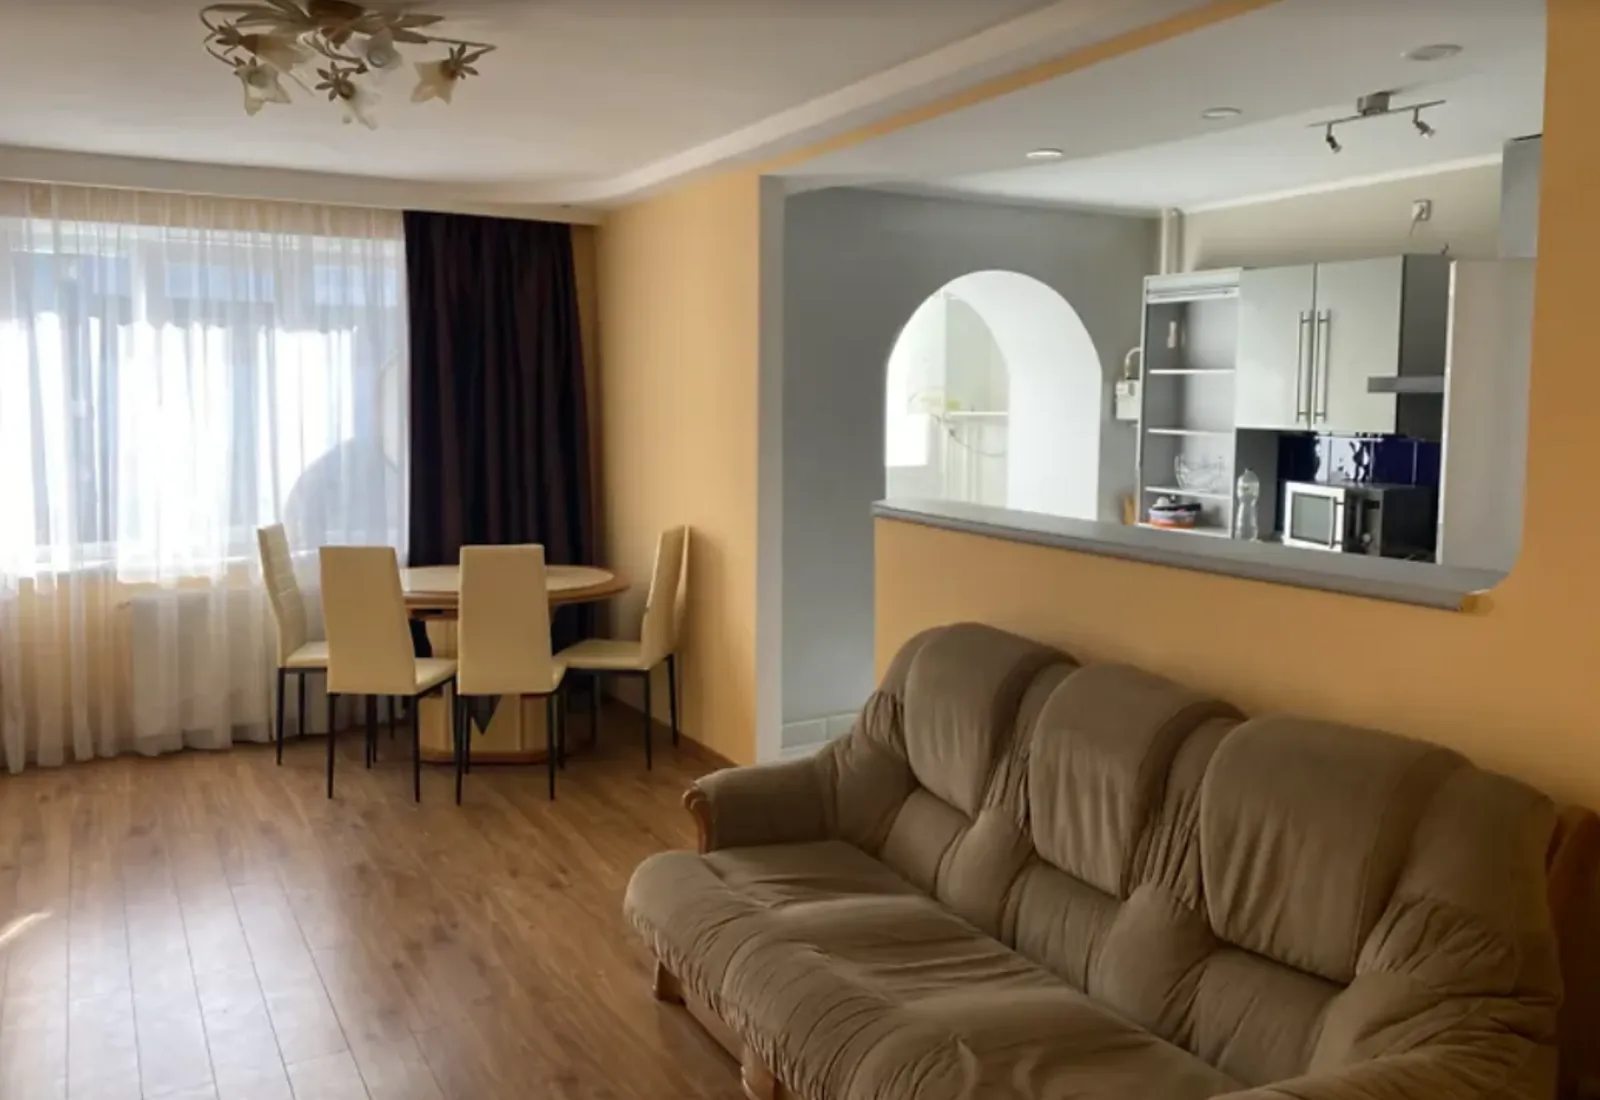 Apartment for rent. 3 rooms, 80 m², 4th floor/9 floors. Tsentr, Ternopil. 